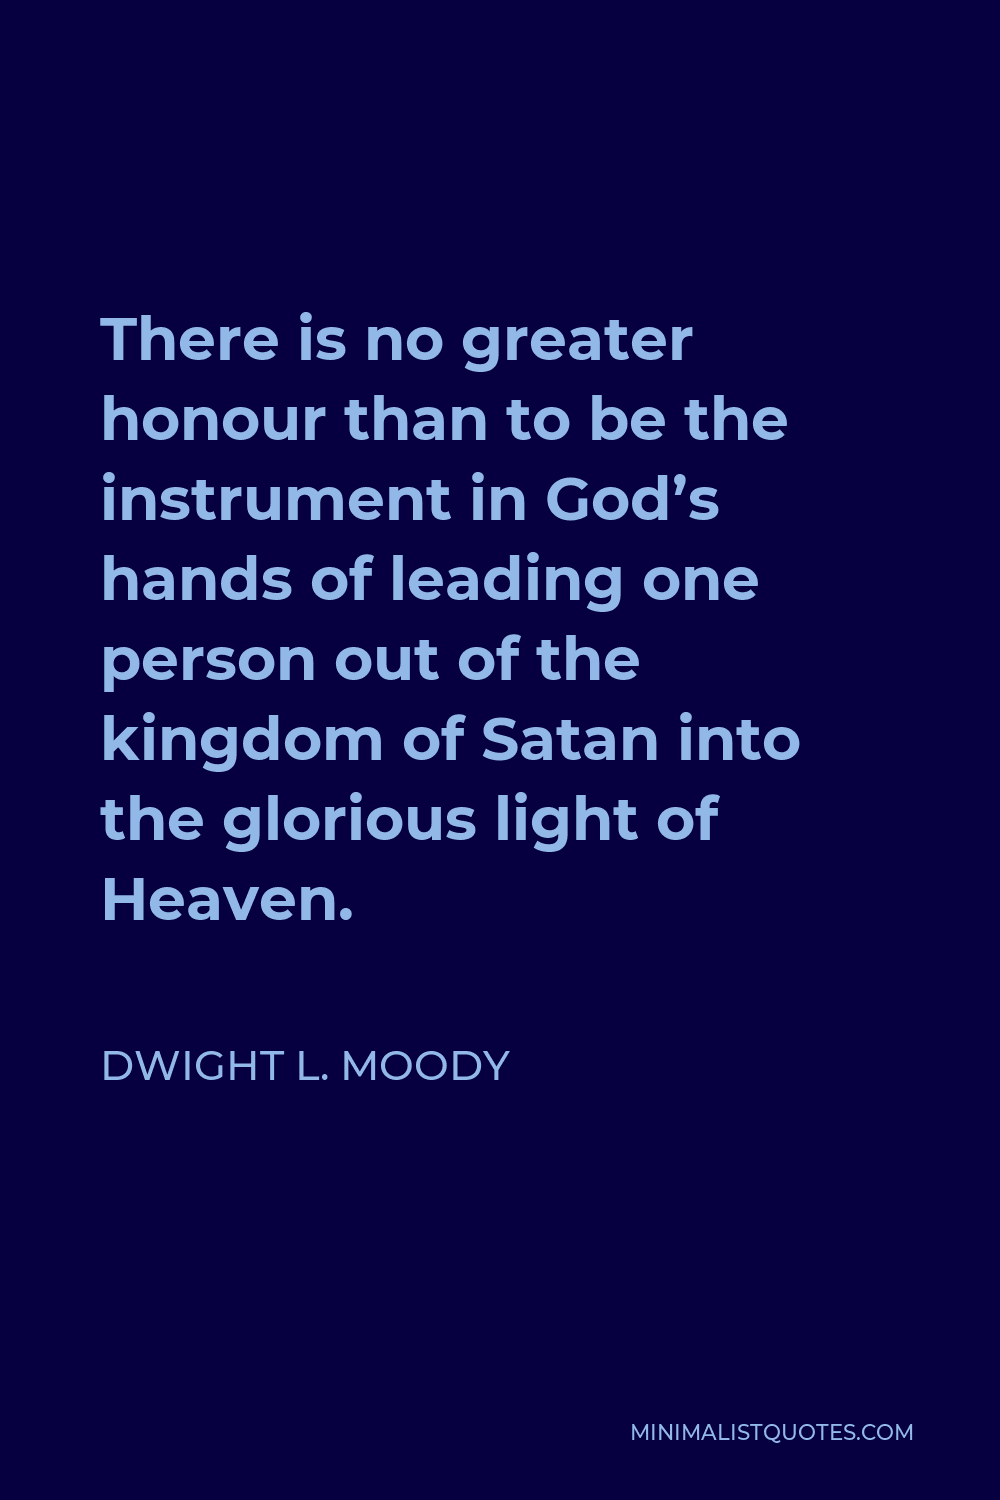 Dwight L. Moody Quote - There is no greater honour than to be the instrument in God’s hands of leading one person out of the kingdom of Satan into the glorious light of Heaven.